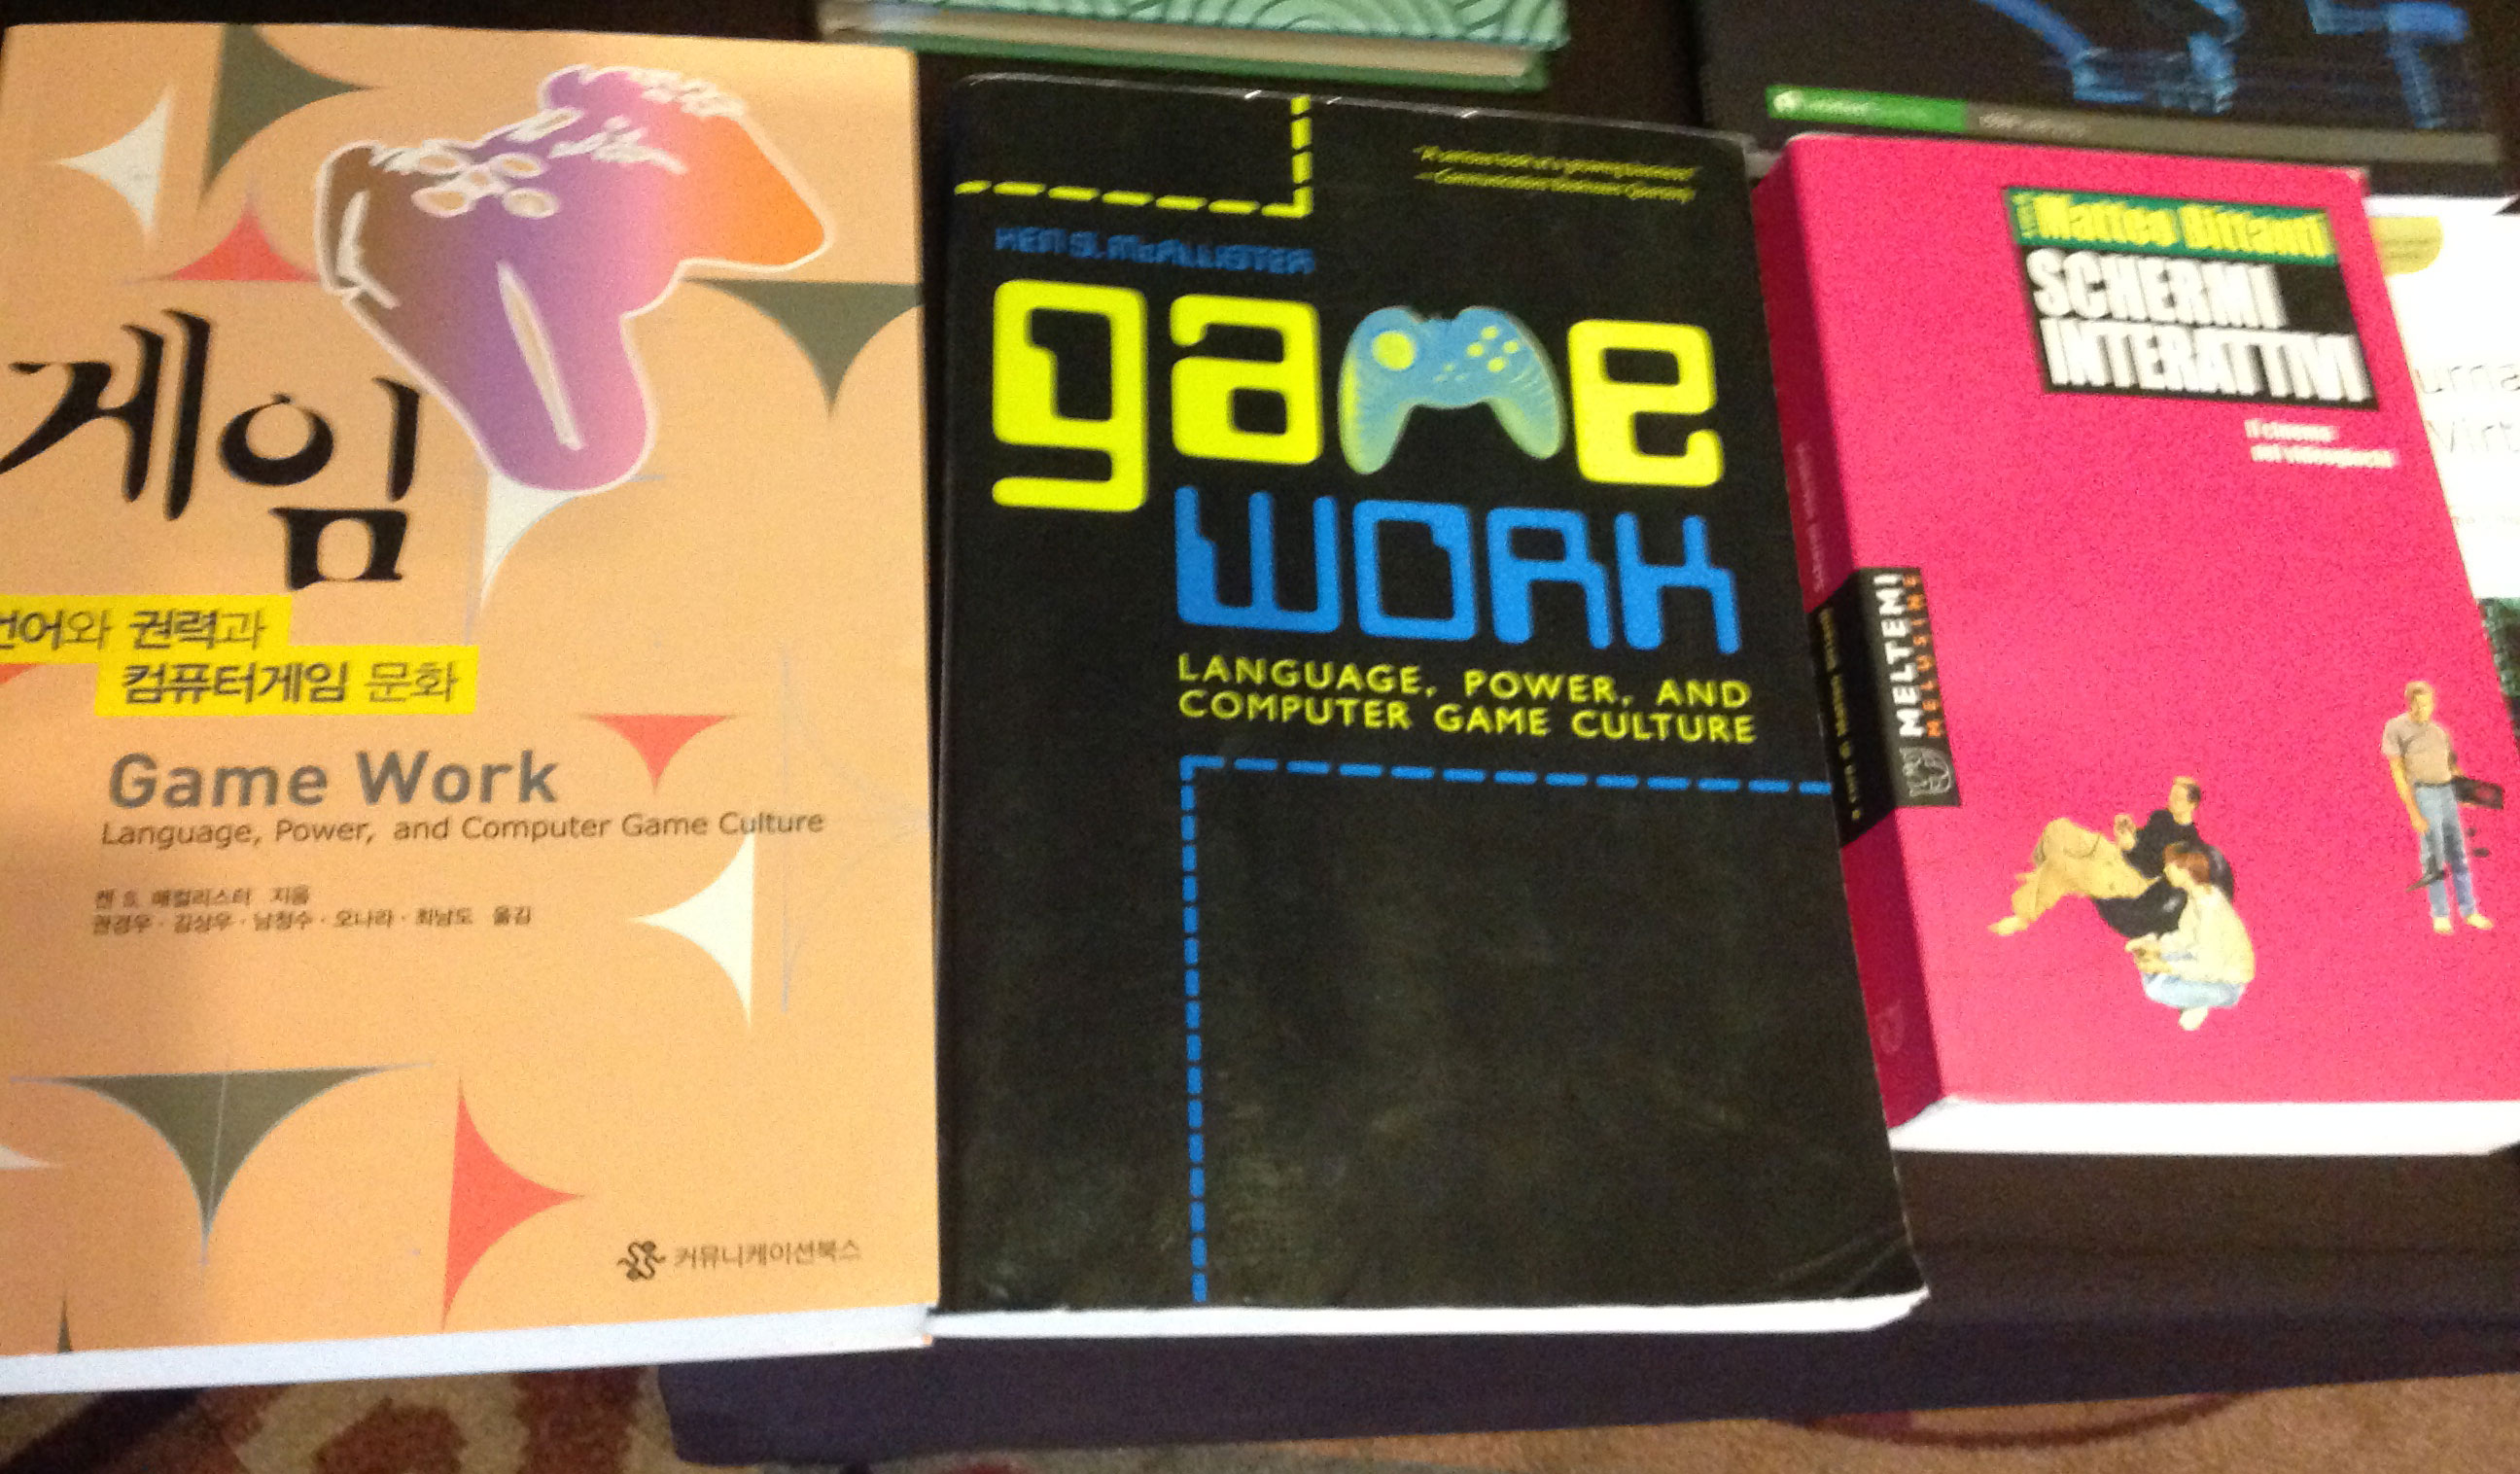 Books at the book table, including Game Work